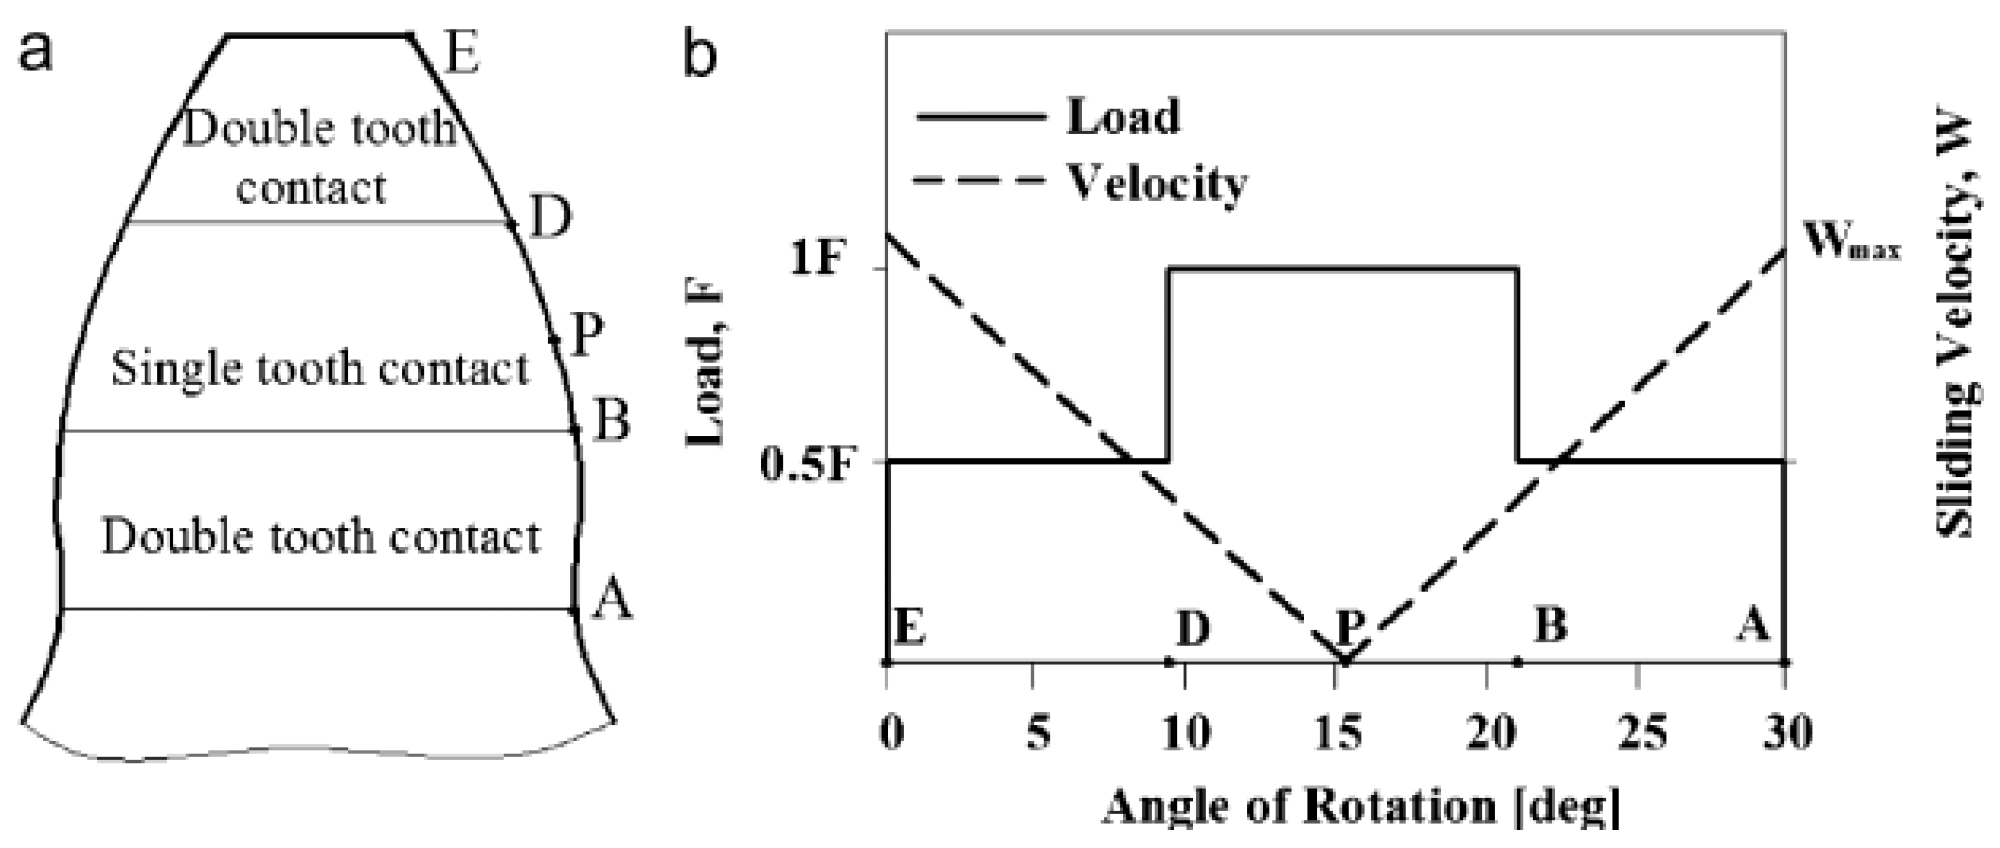 (a) Tooth contact areas and limits (b) load-surface velocity distribution.